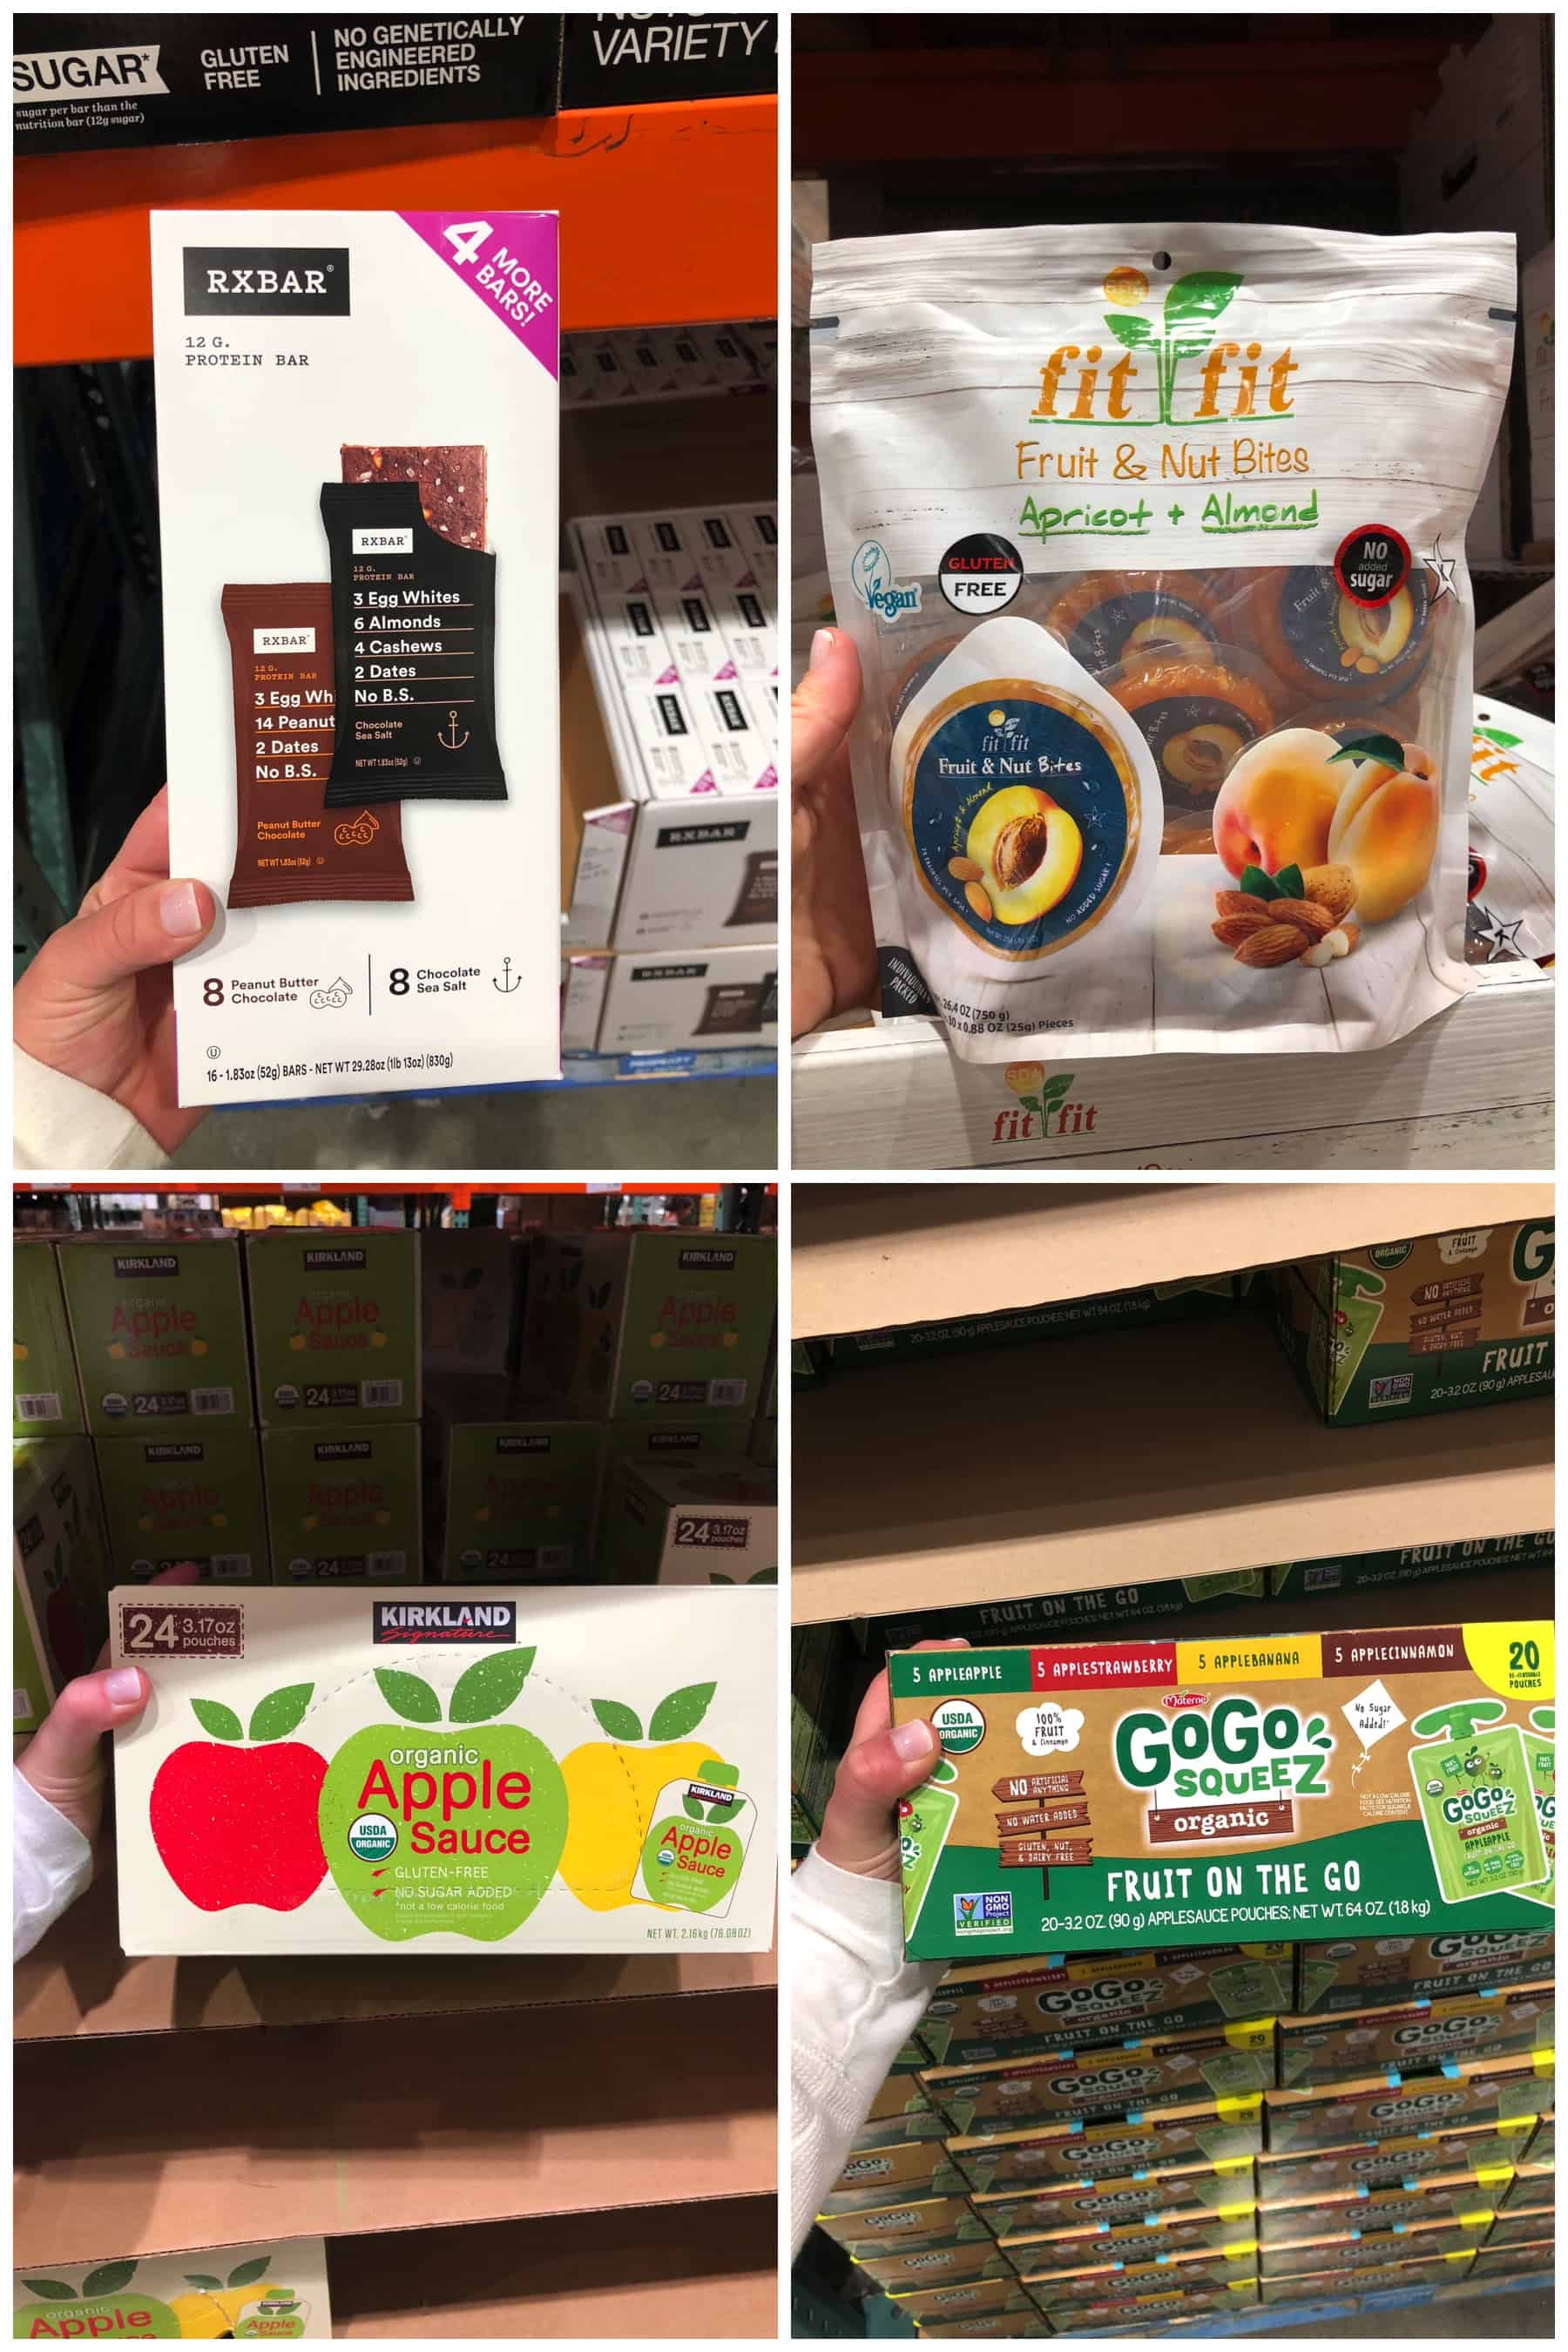 snack items from whole30 shopping list found at Costco